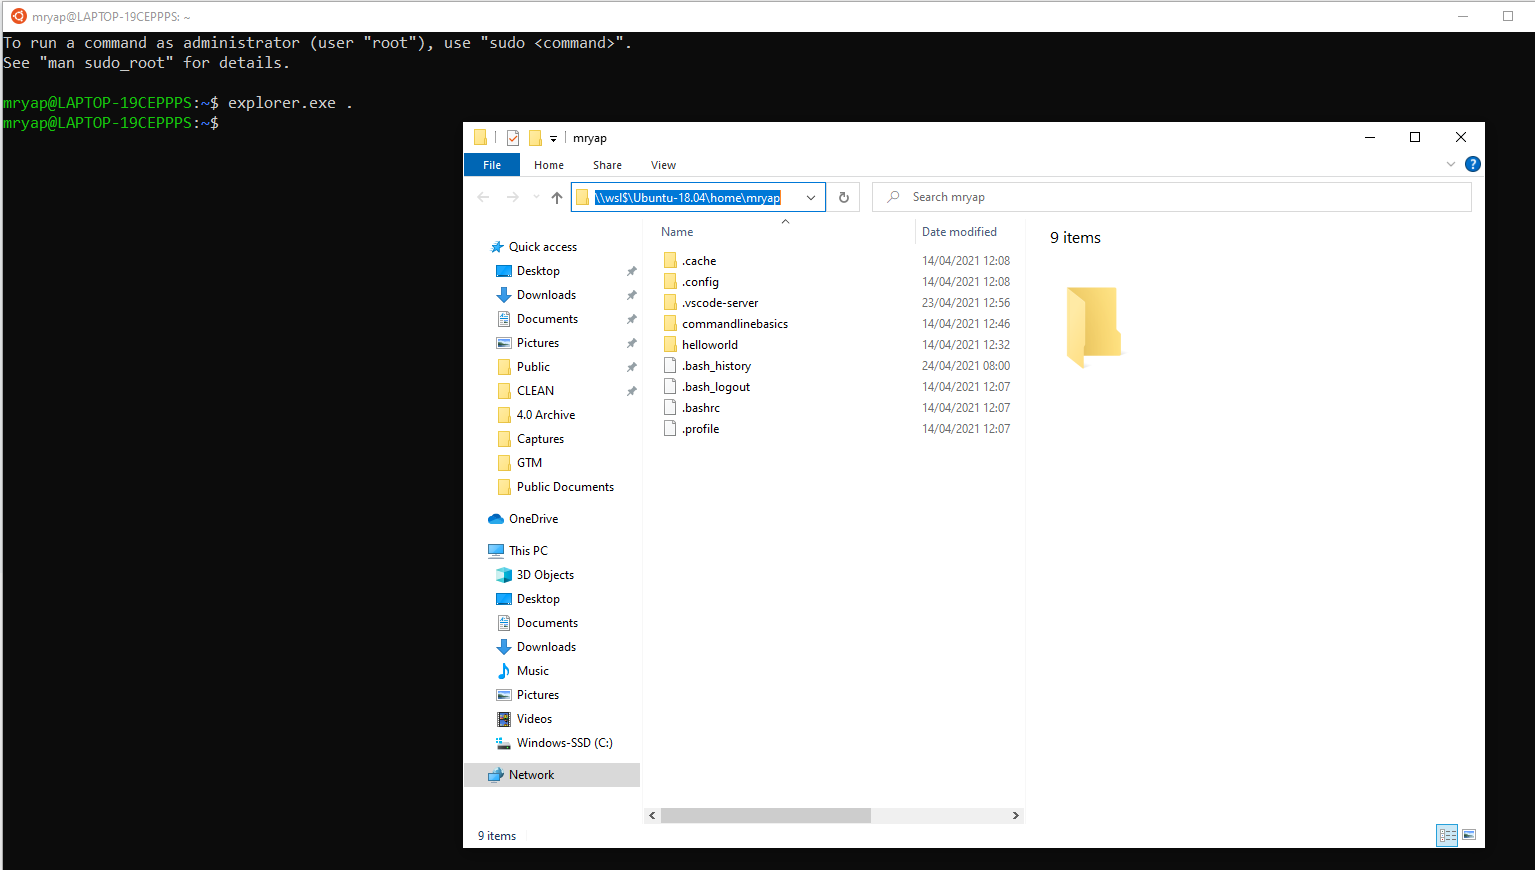 In Ubuntu environment, launch Windows Explorer and show the current directory in the WSL environment.